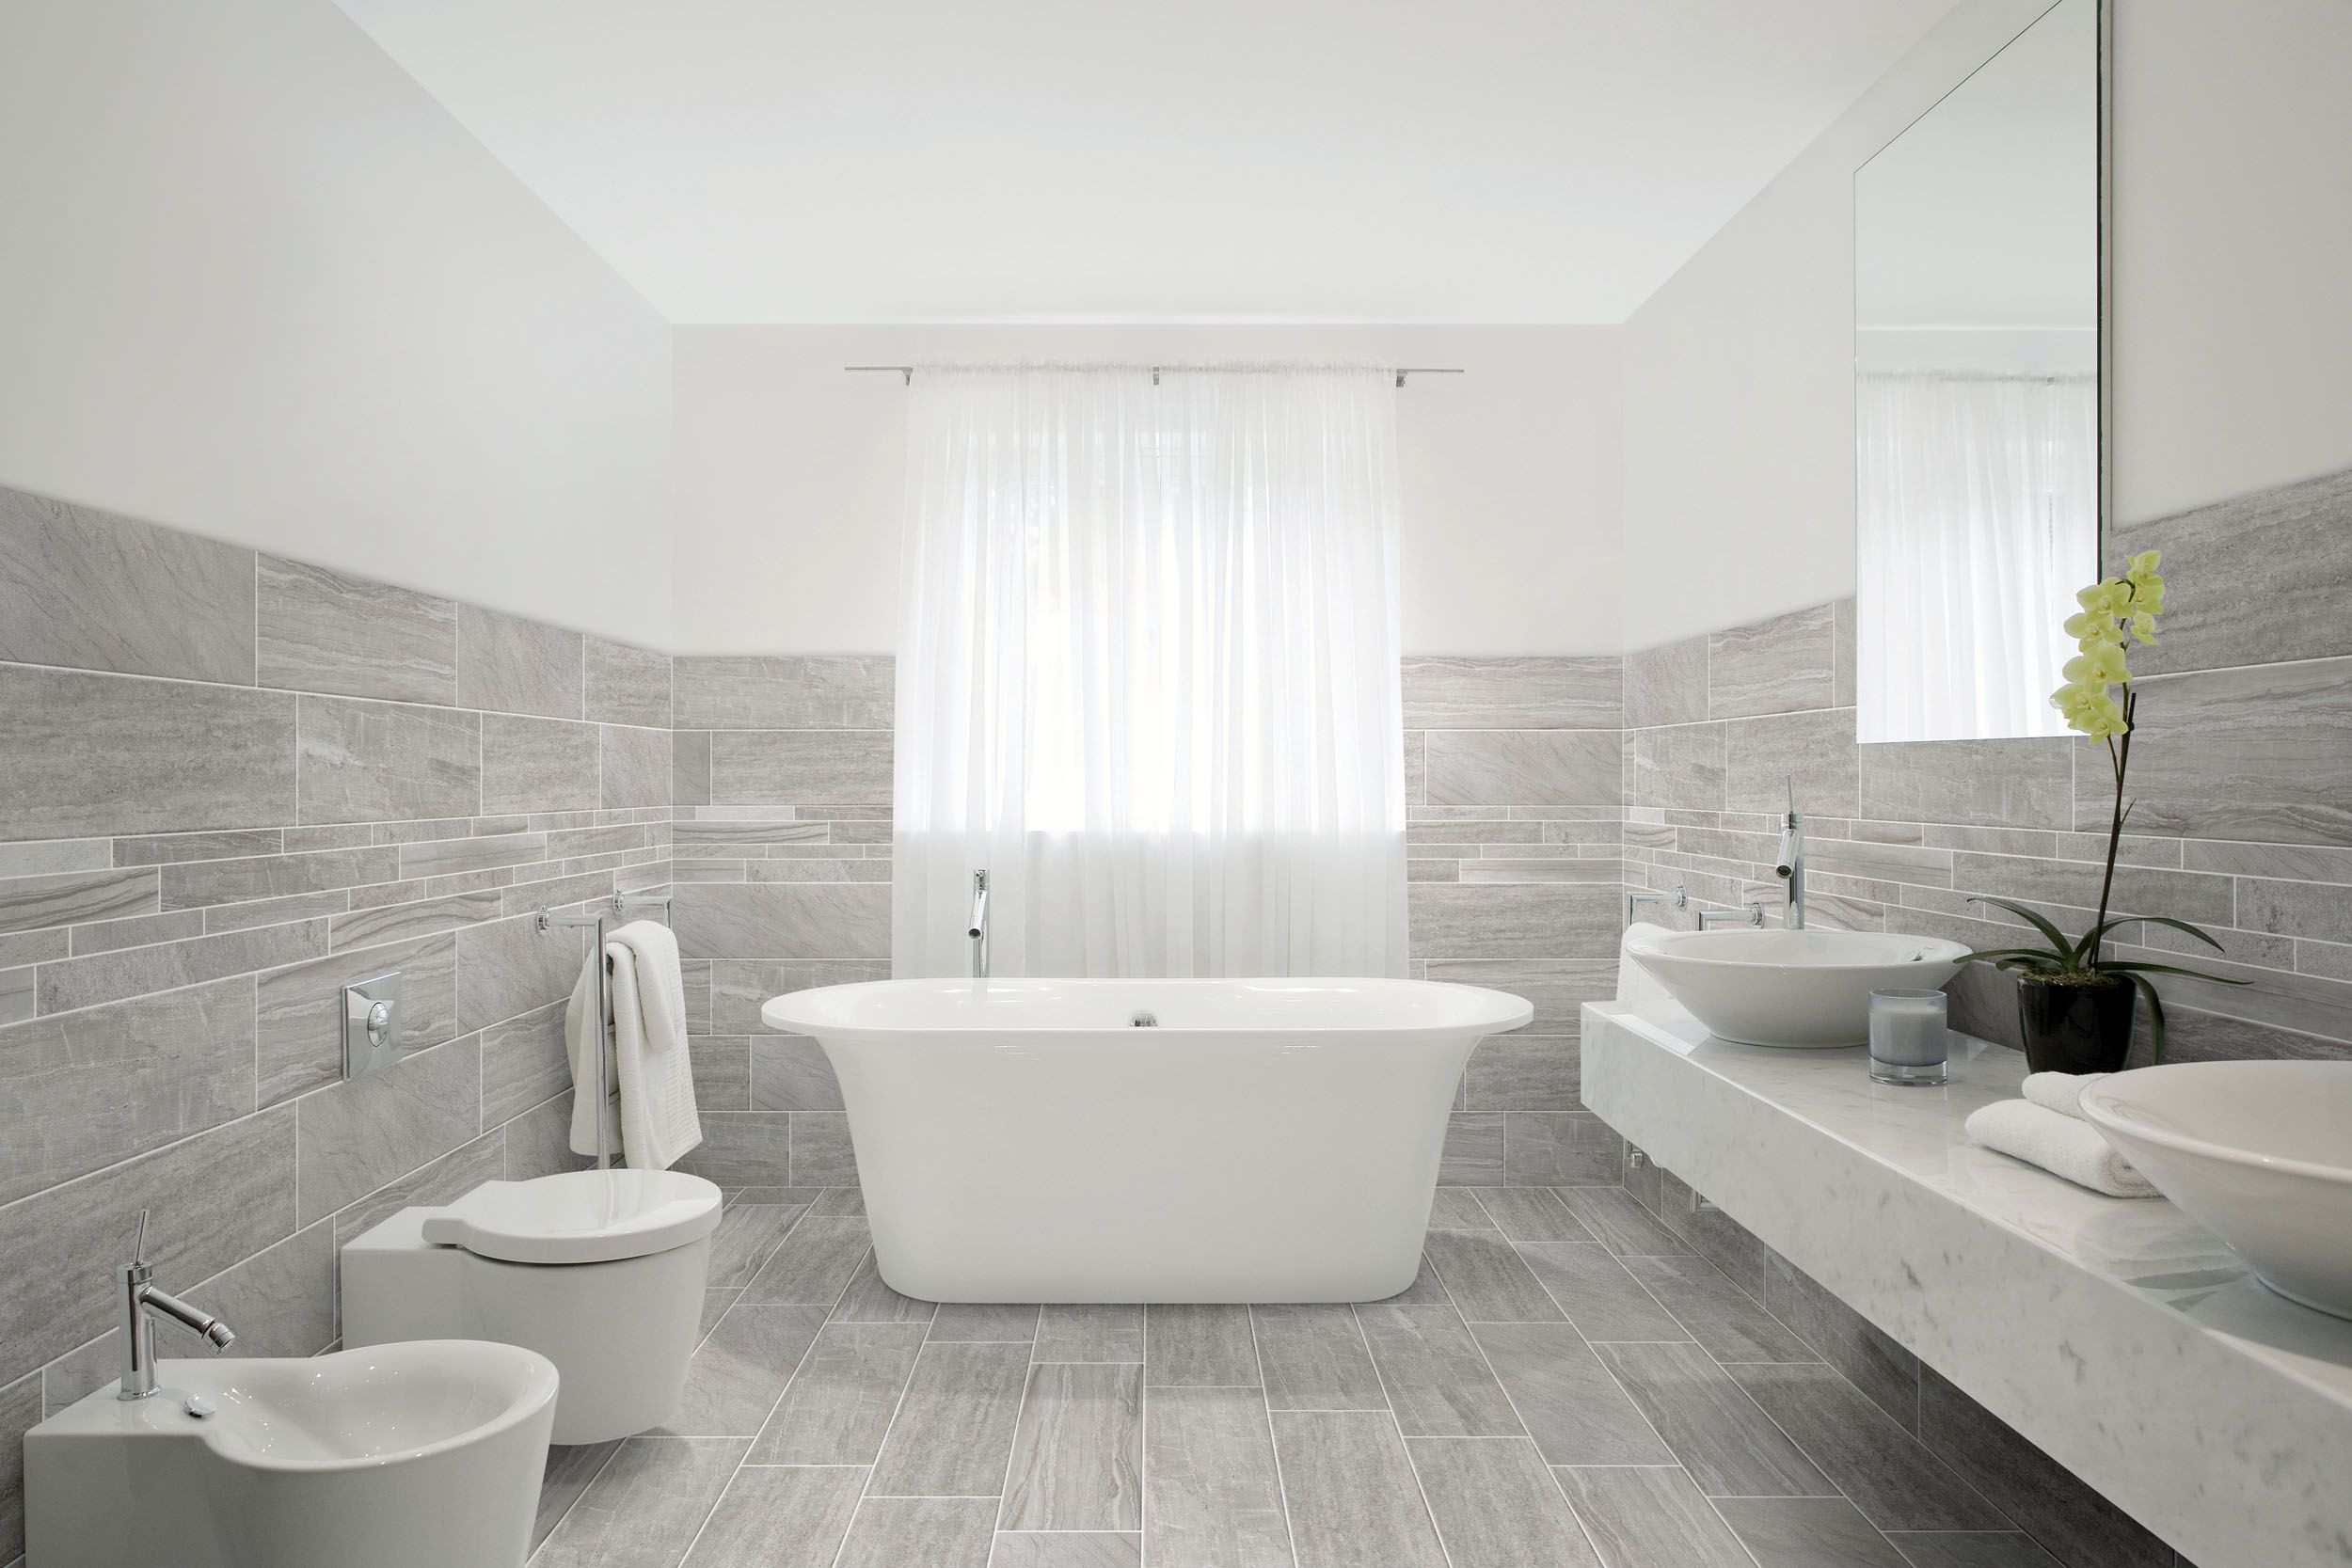 Porcelain Wall Tiles Bathroom
 Porcelain Tile With Mixed Look of Wood Stone and Concrete